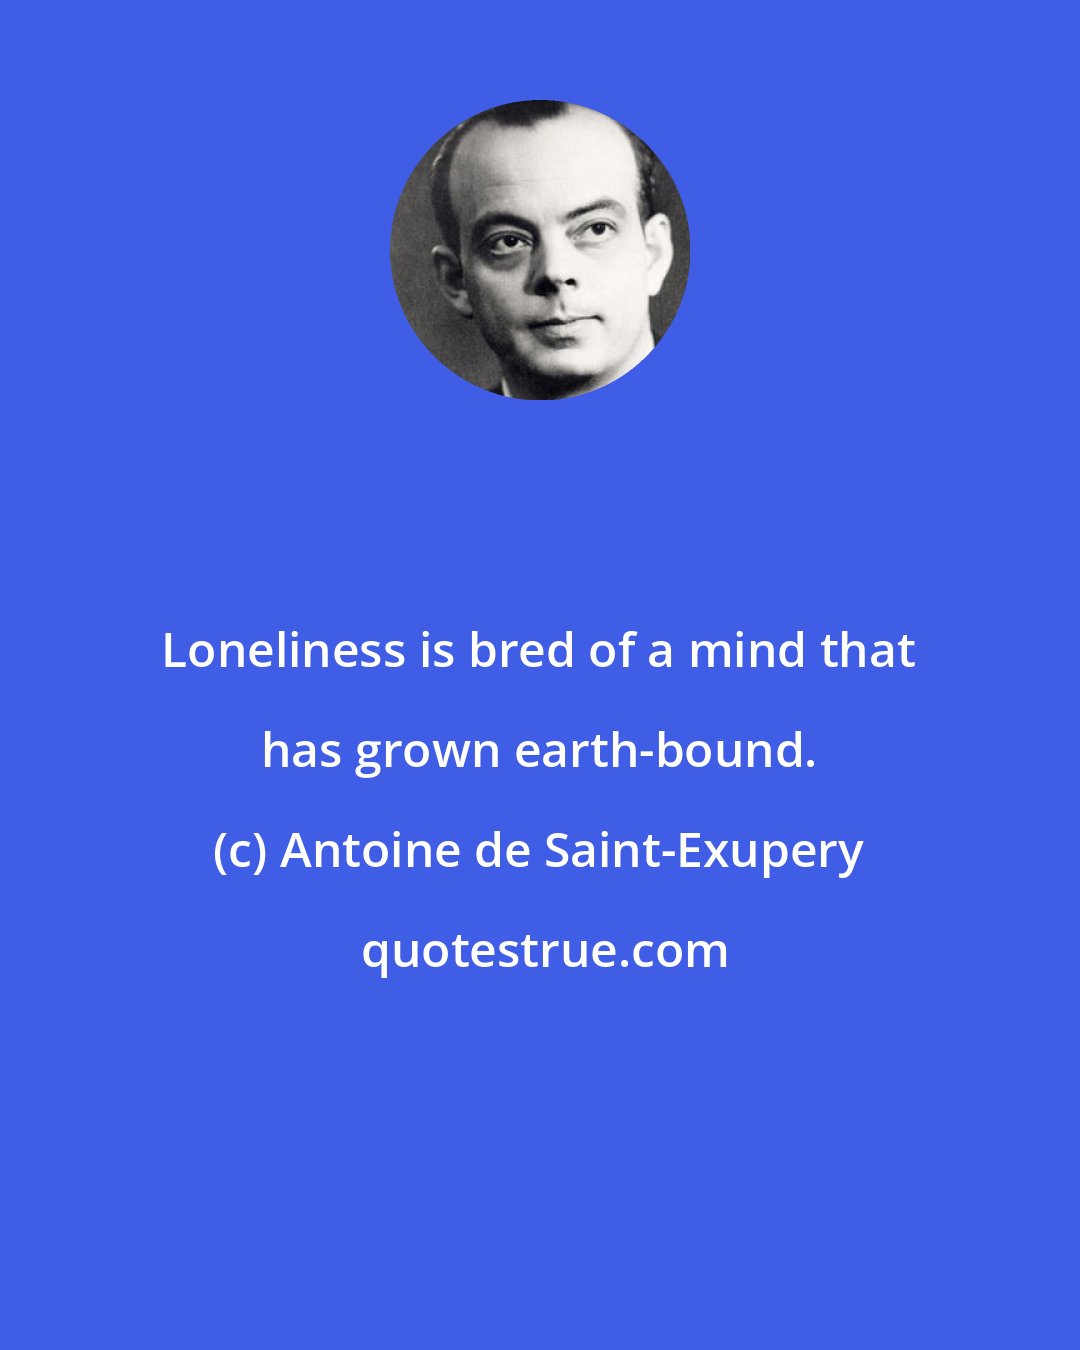 Antoine de Saint-Exupery: Loneliness is bred of a mind that has grown earth-bound.